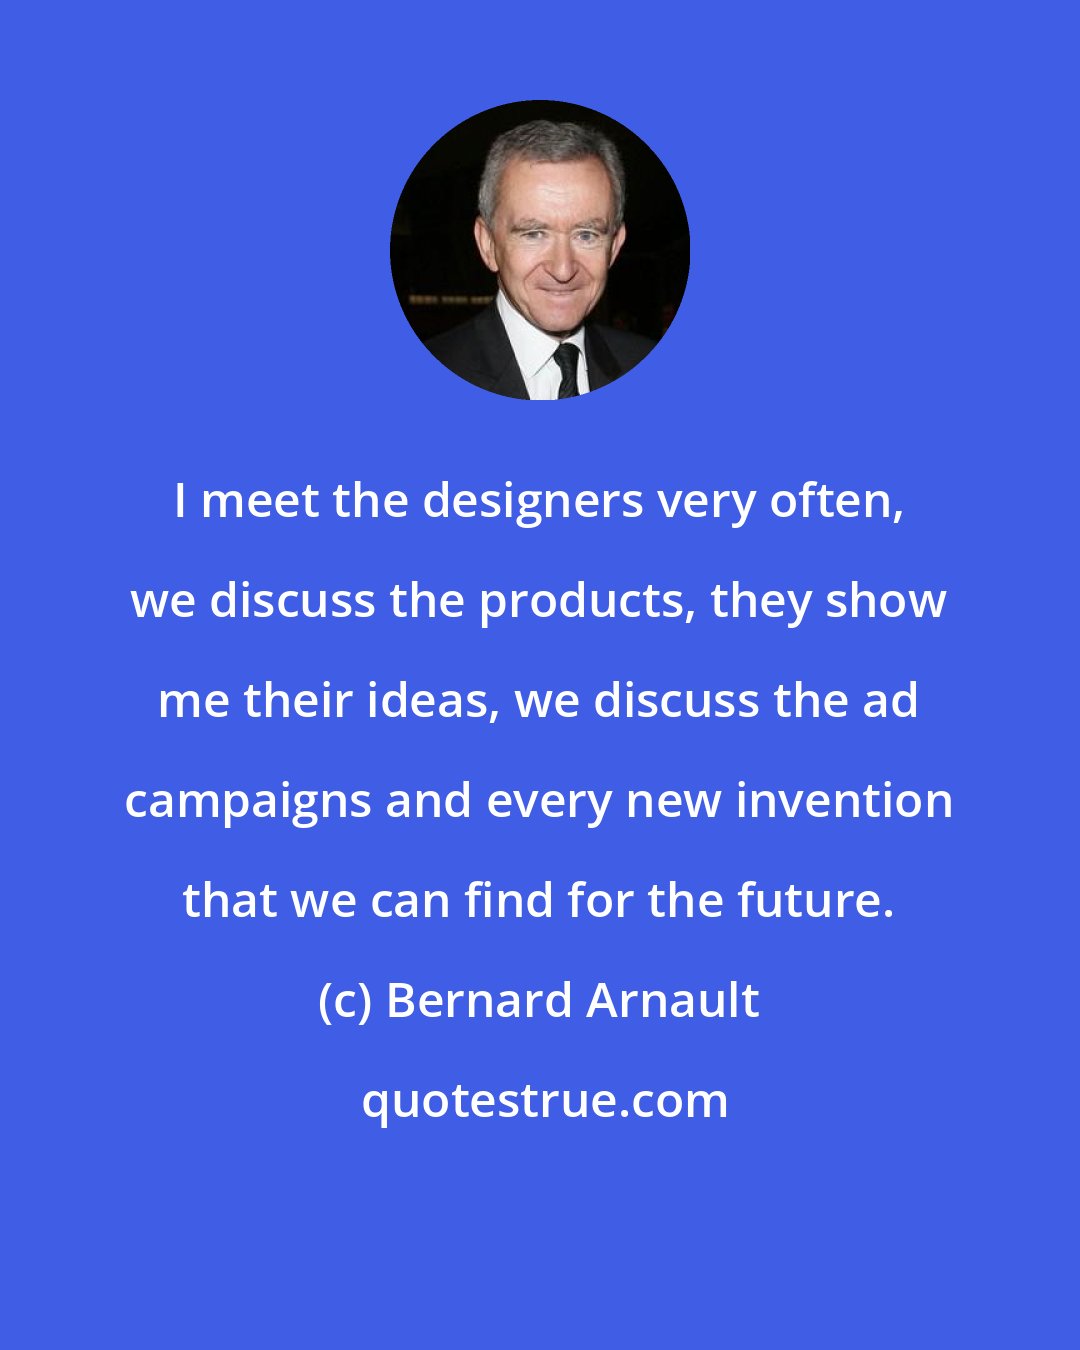 Bernard Arnault: I meet the designers very often, we discuss the products, they show me their ideas, we discuss the ad campaigns and every new invention that we can find for the future.